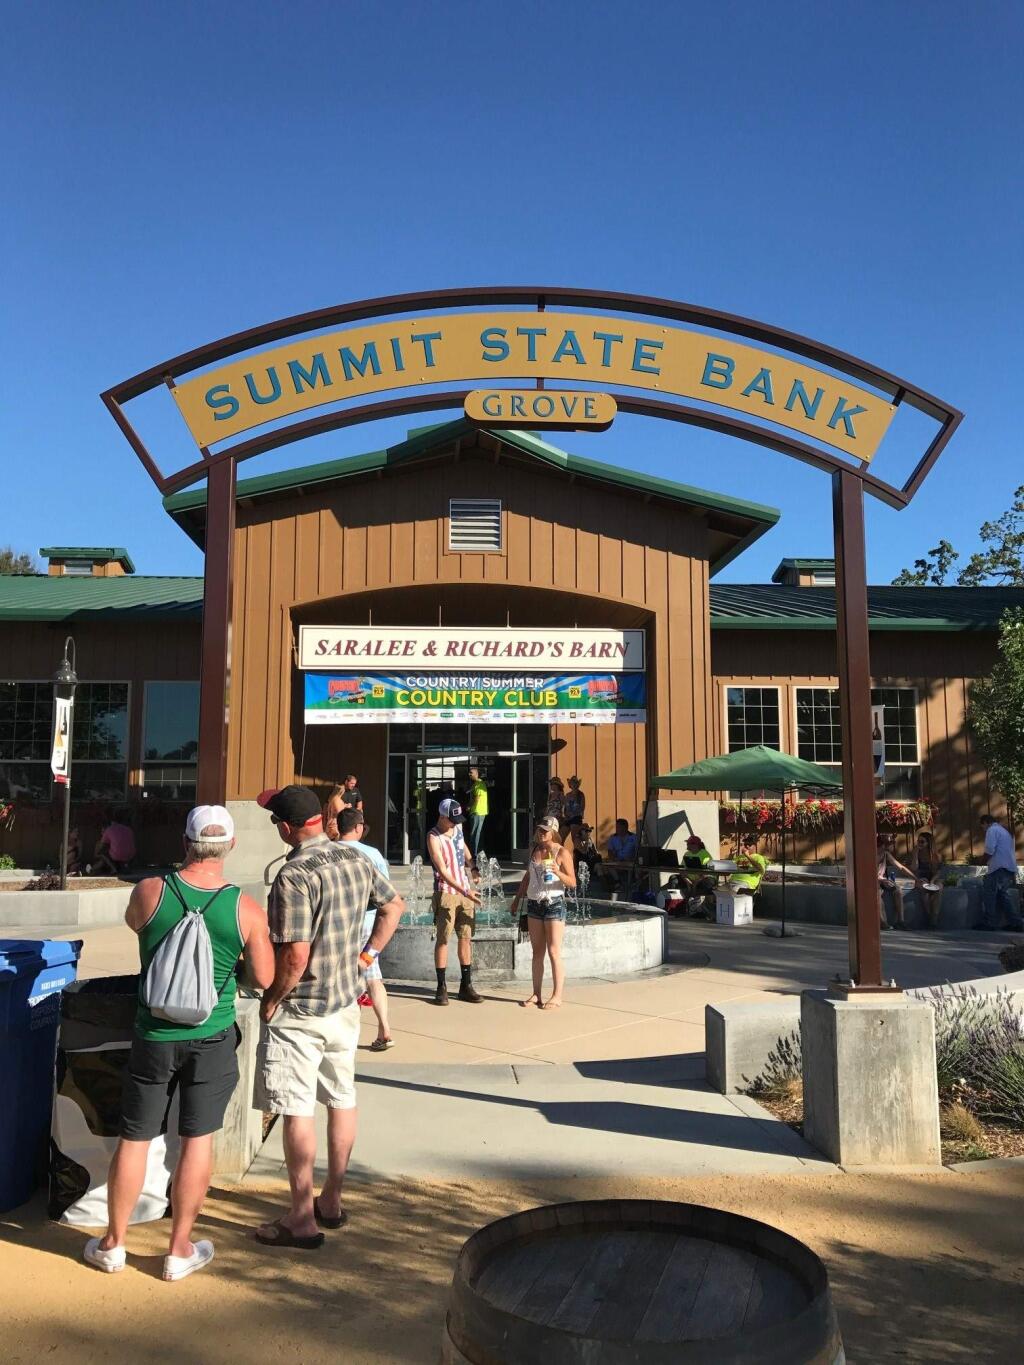 Summit State Bank continues its support of the Ag community by sponsoring the Olive Grove in front of Richard and Saralee's Barn at the Santa Rosa fairgrounds in Sonoma County.